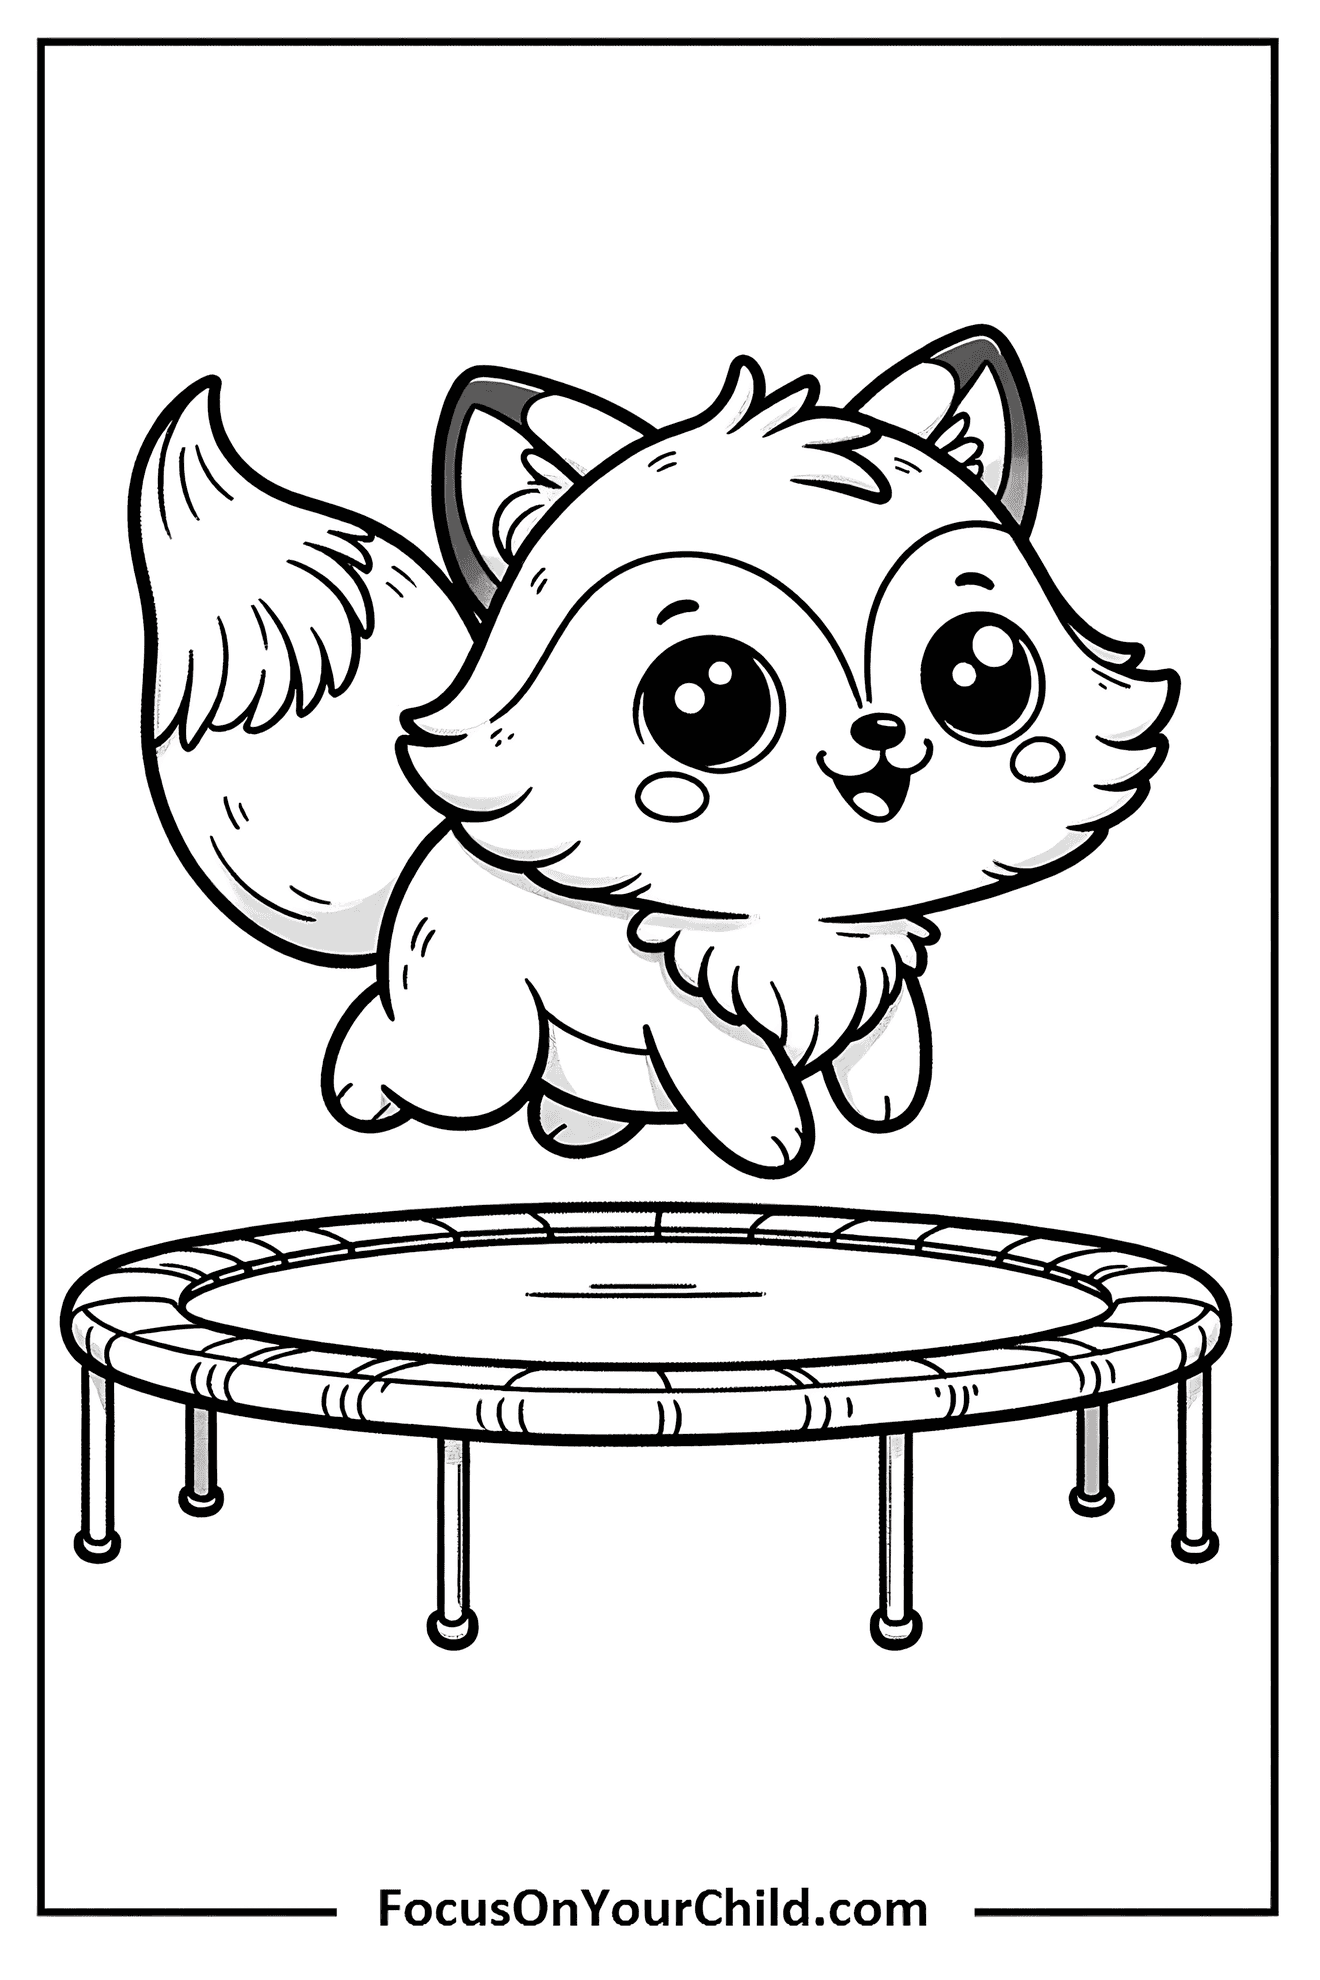 Adorable fox bouncing on trampoline in playful black and white line drawing.